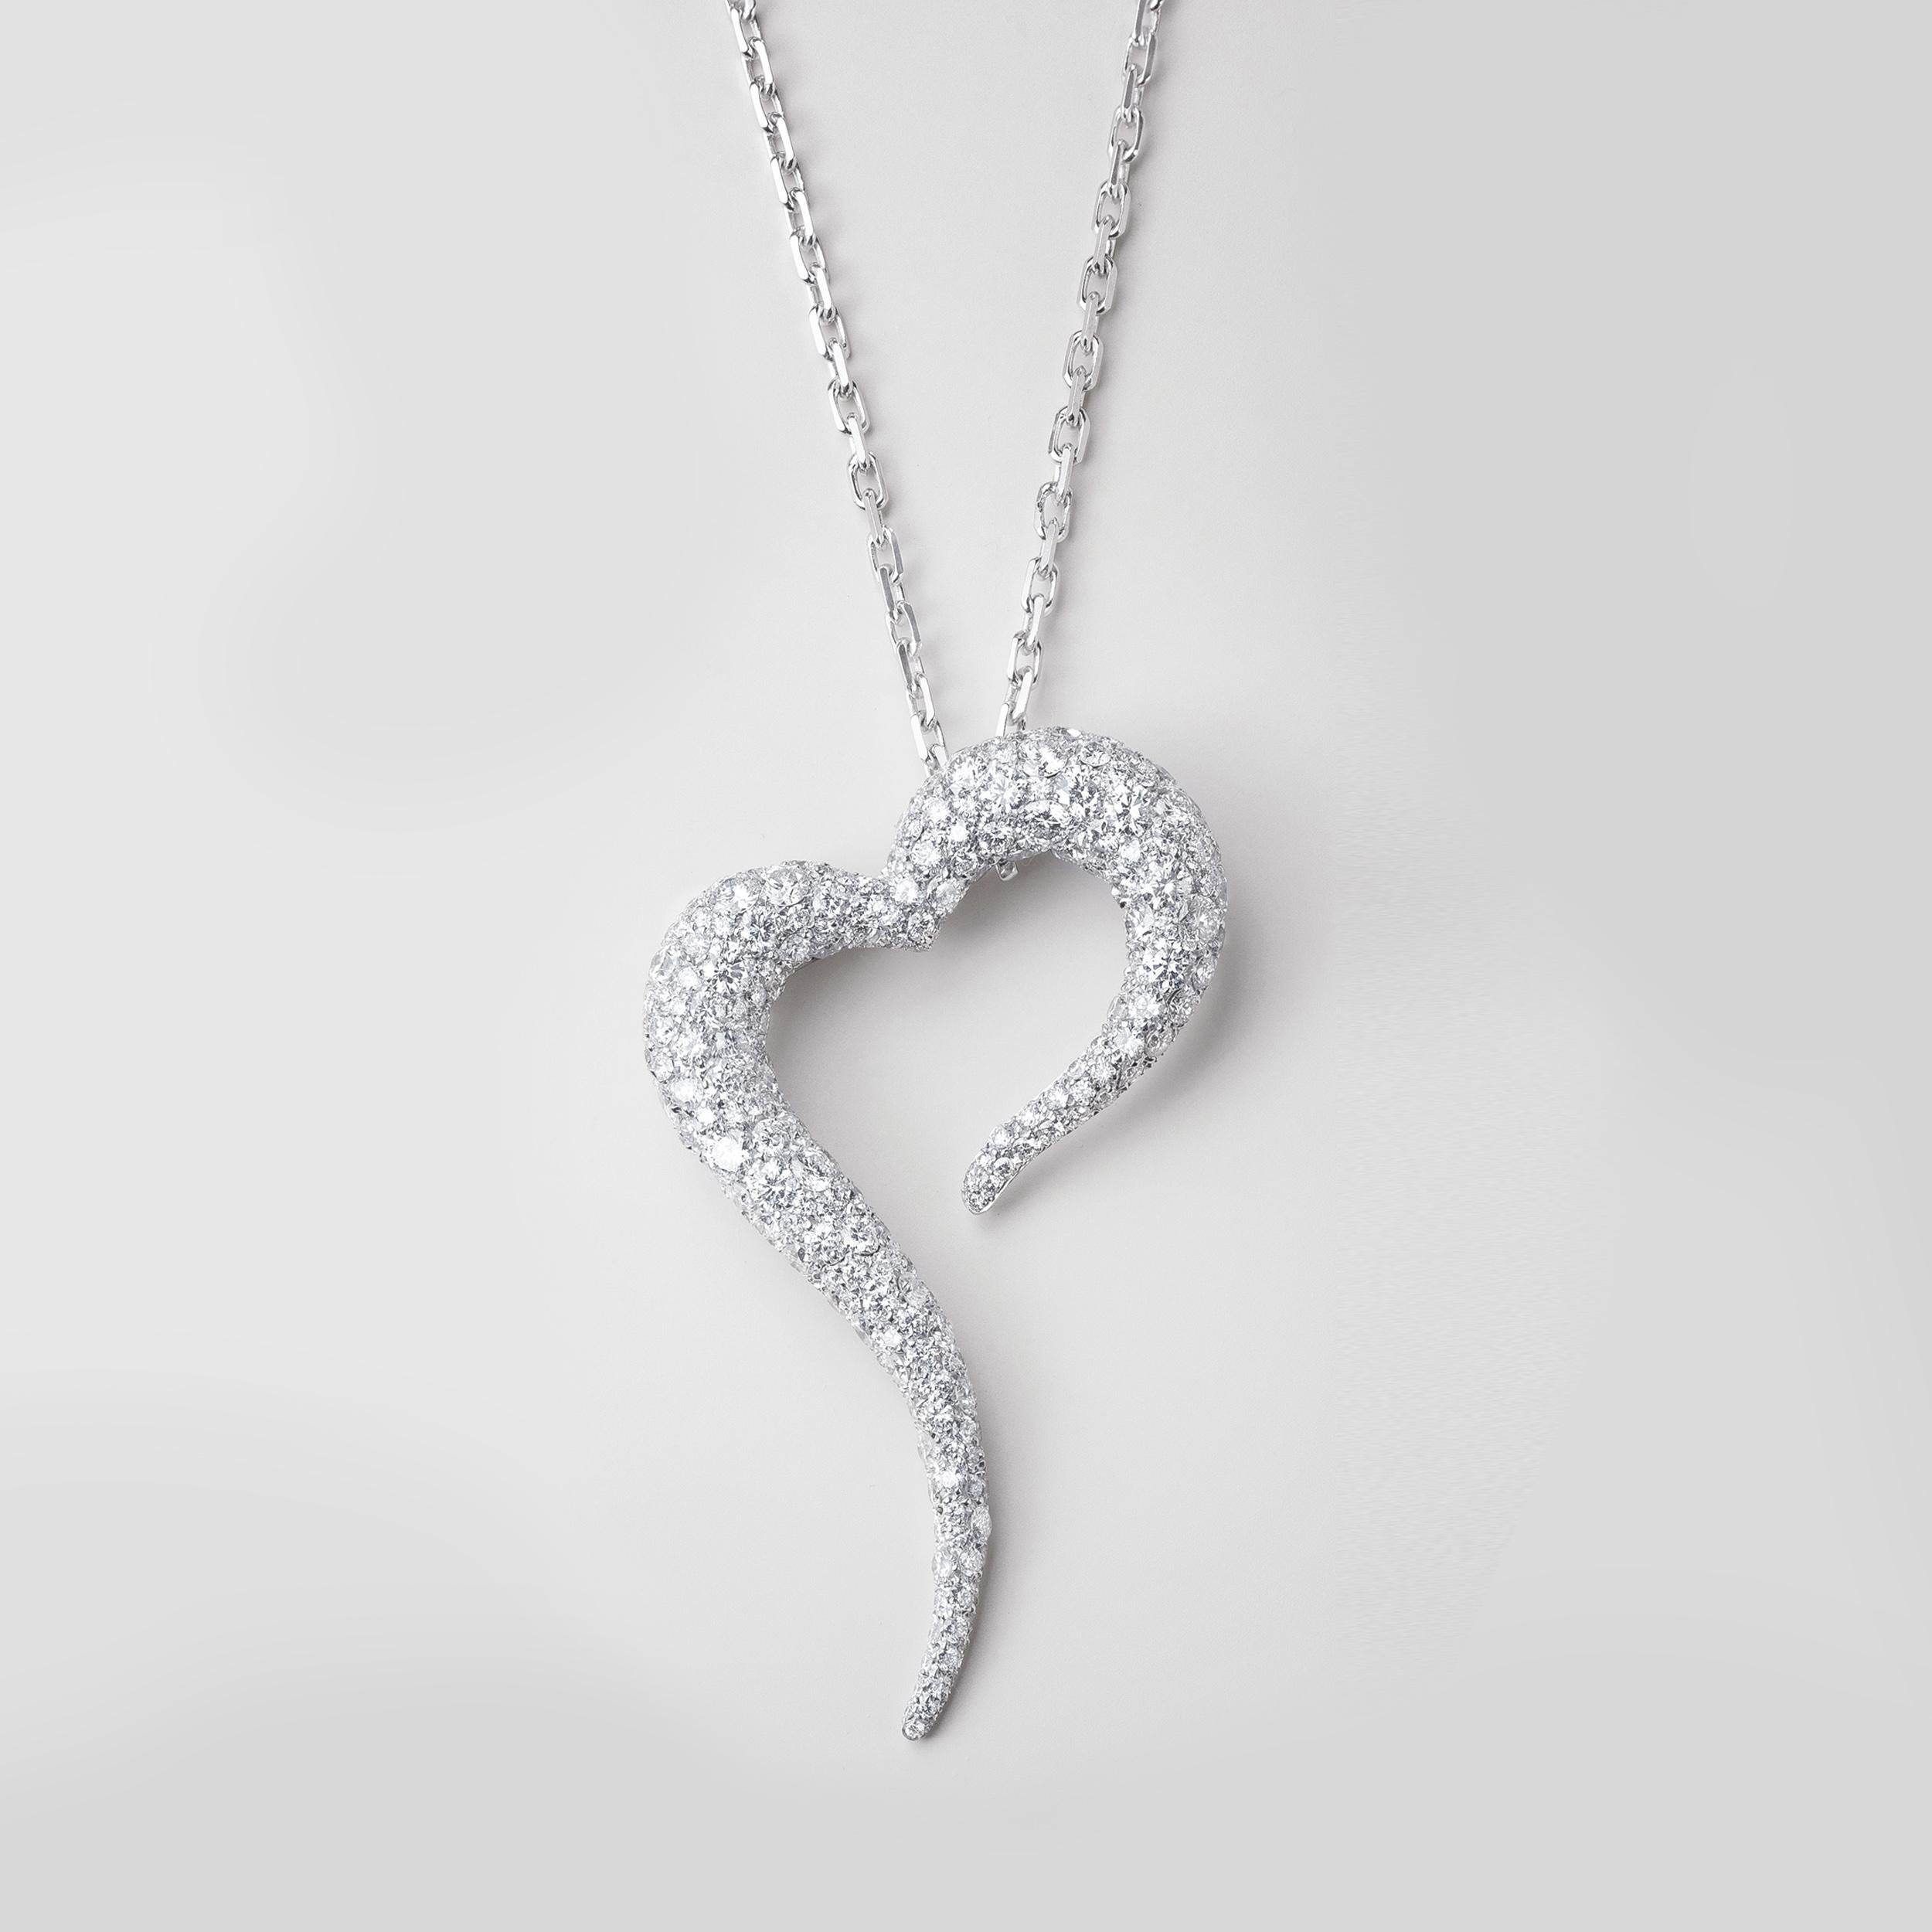 O CORAÇÃO AFRICANO Collection

Love, my African heart, is a passionate love letter to Africa. A place of great generosity, beauty and opulence and a nod to VANLELES Founder and Creative Director's heritage. 

Pendant crafted in 18k white